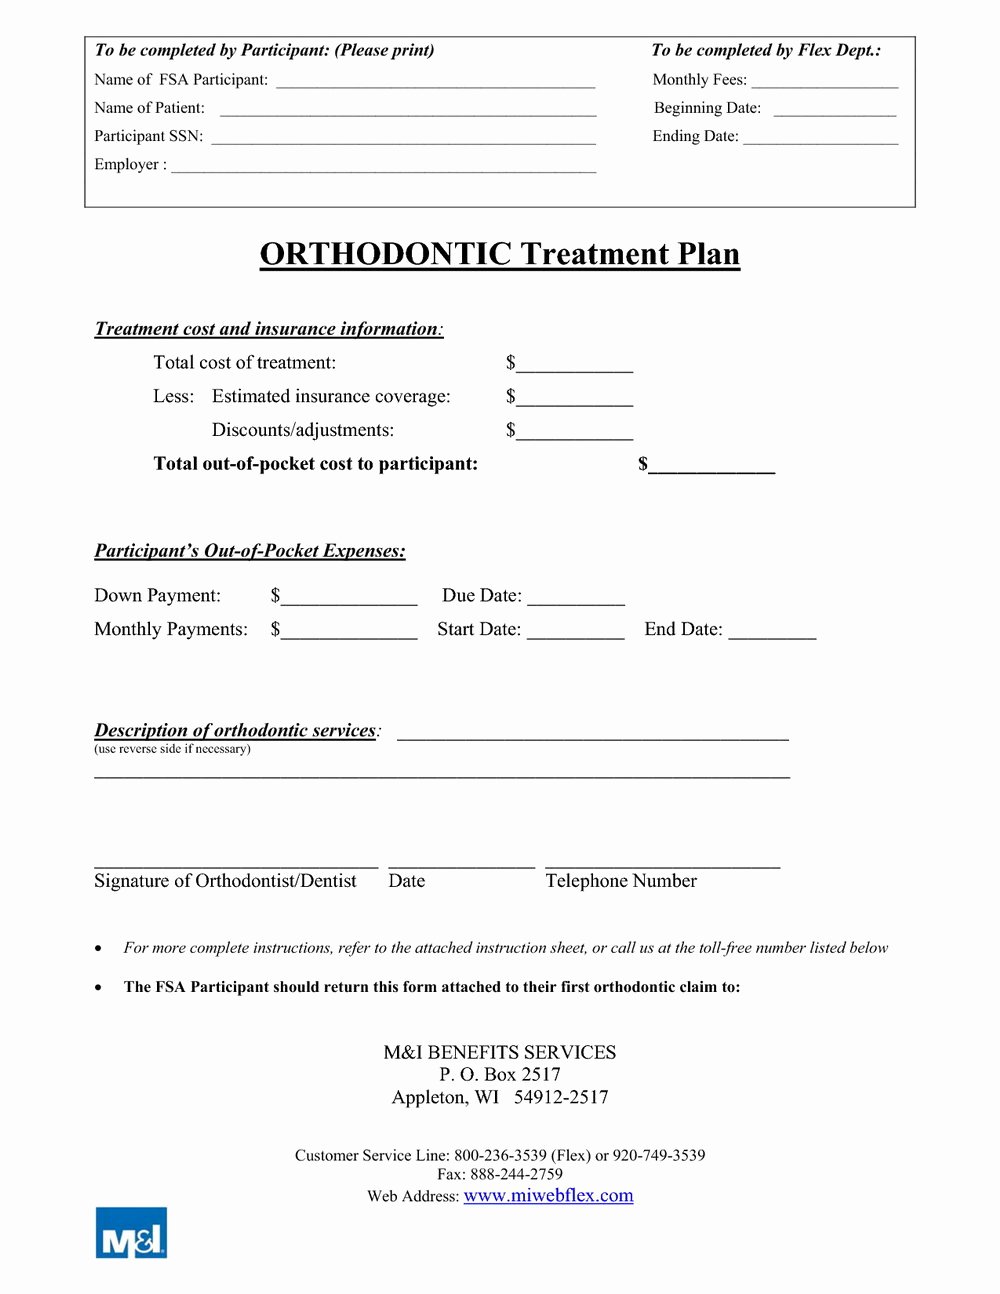 Dental Payment Plan Agreement Template Beautiful orthodontic Treatment forms forms